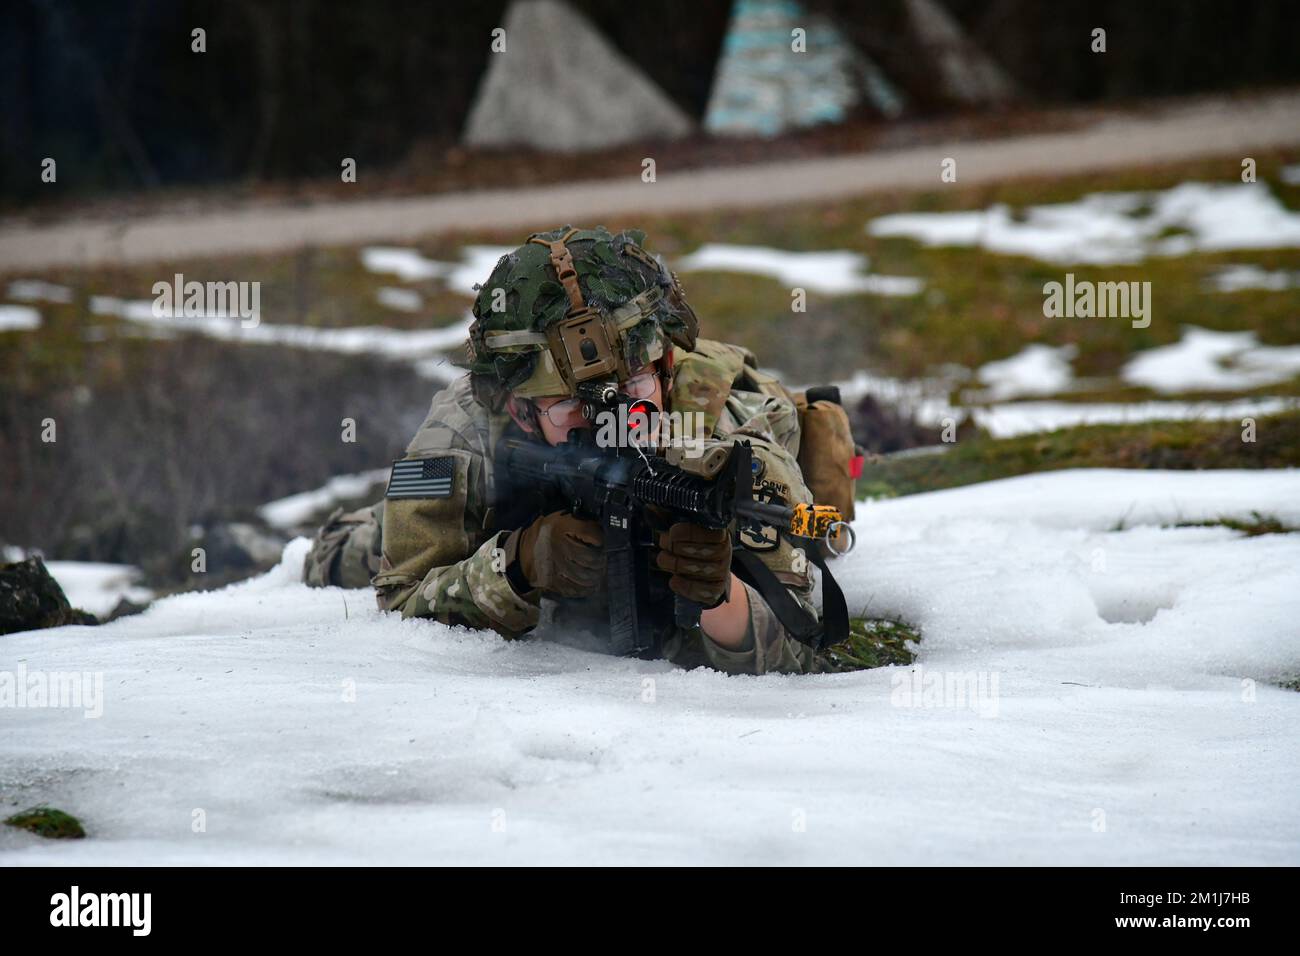 A U. S. Army Paratrooper assigned to the Bastion Company, 54th Brigade Engineer Battalion, 173rd Airborne Brigade, engages a target during squad blank-fire and tactical movement training at Bloska Polica Range in Postonja, Slovenia, Dec. 6, 2022. The 173rd Airborne Brigade is the U.S. Army Contingency Response Force in Europe, capable of projecting ready forces anywhere in the U.S. European, Africa or Central Commands' areas of responsibility. (U.S. Army Photo by Paolo Bovo) Stock Photo